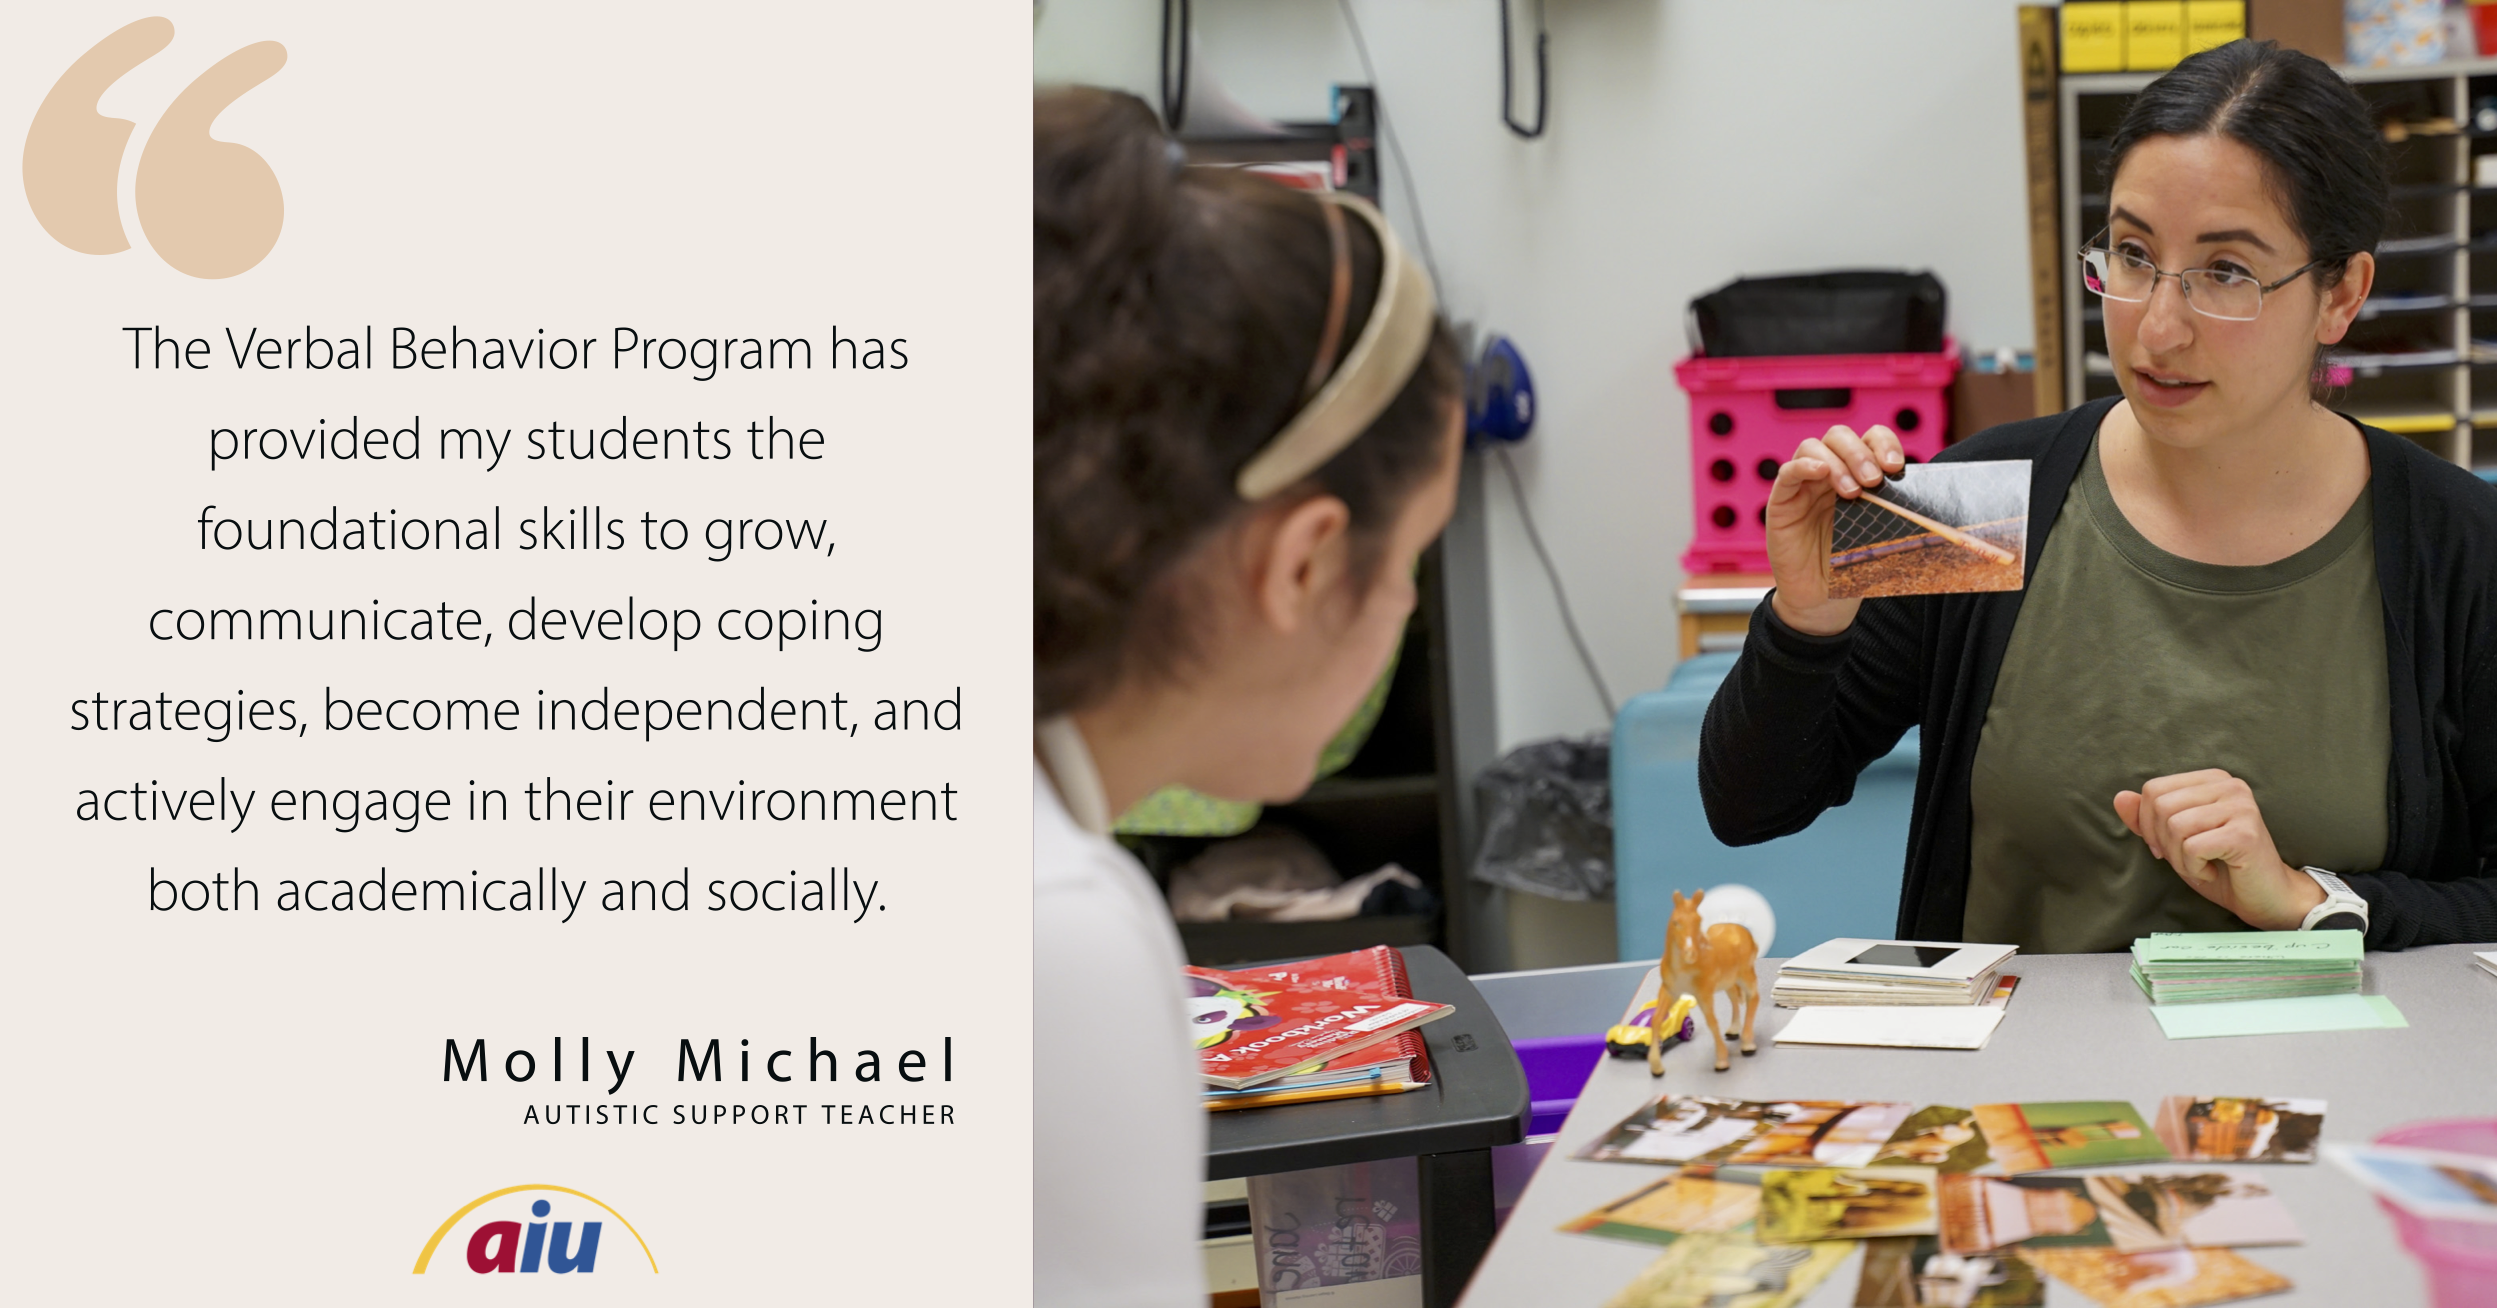 "The Verbal Behavior Program has provided my students the foundational skills to grow [and] communicate," says Molly Michael.